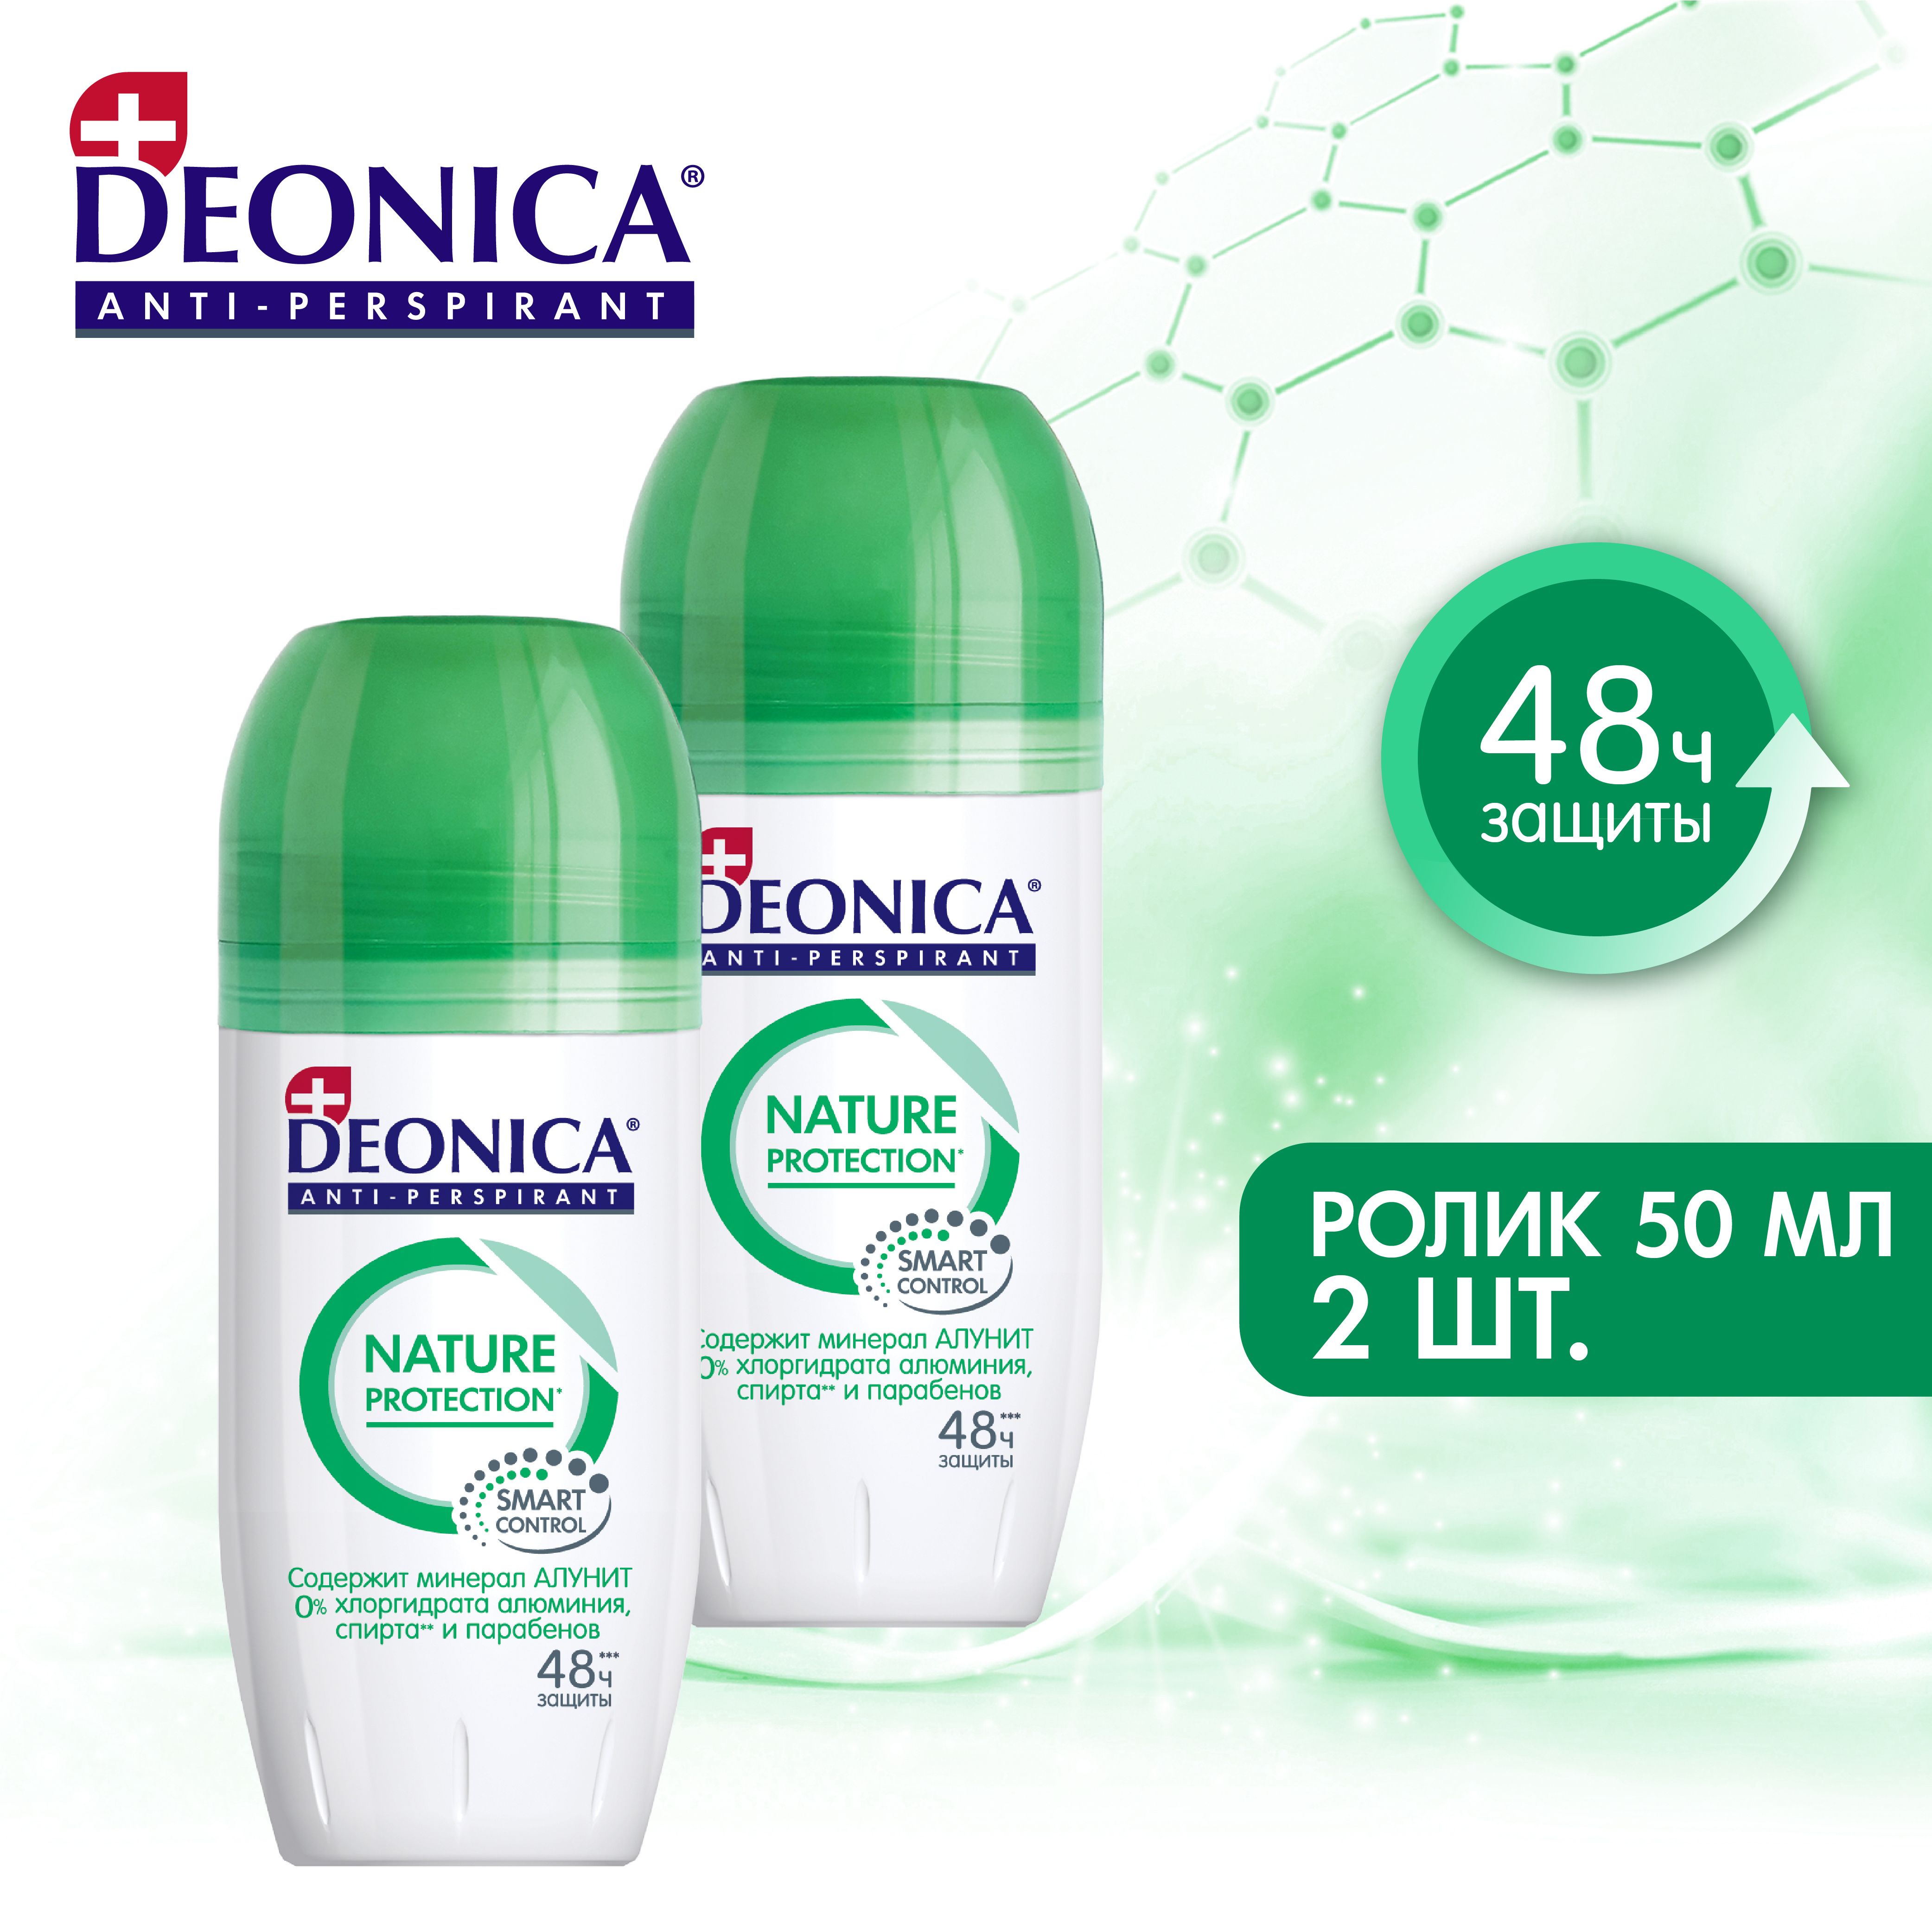 Deonica 50мл ролик nature Protection. Deonica дезодорант nature Protection. Антиперспирант ролик Deonica for men nature Protection. Deonica антиперспирант про защита ролик. Deonica дезодорант отзывы